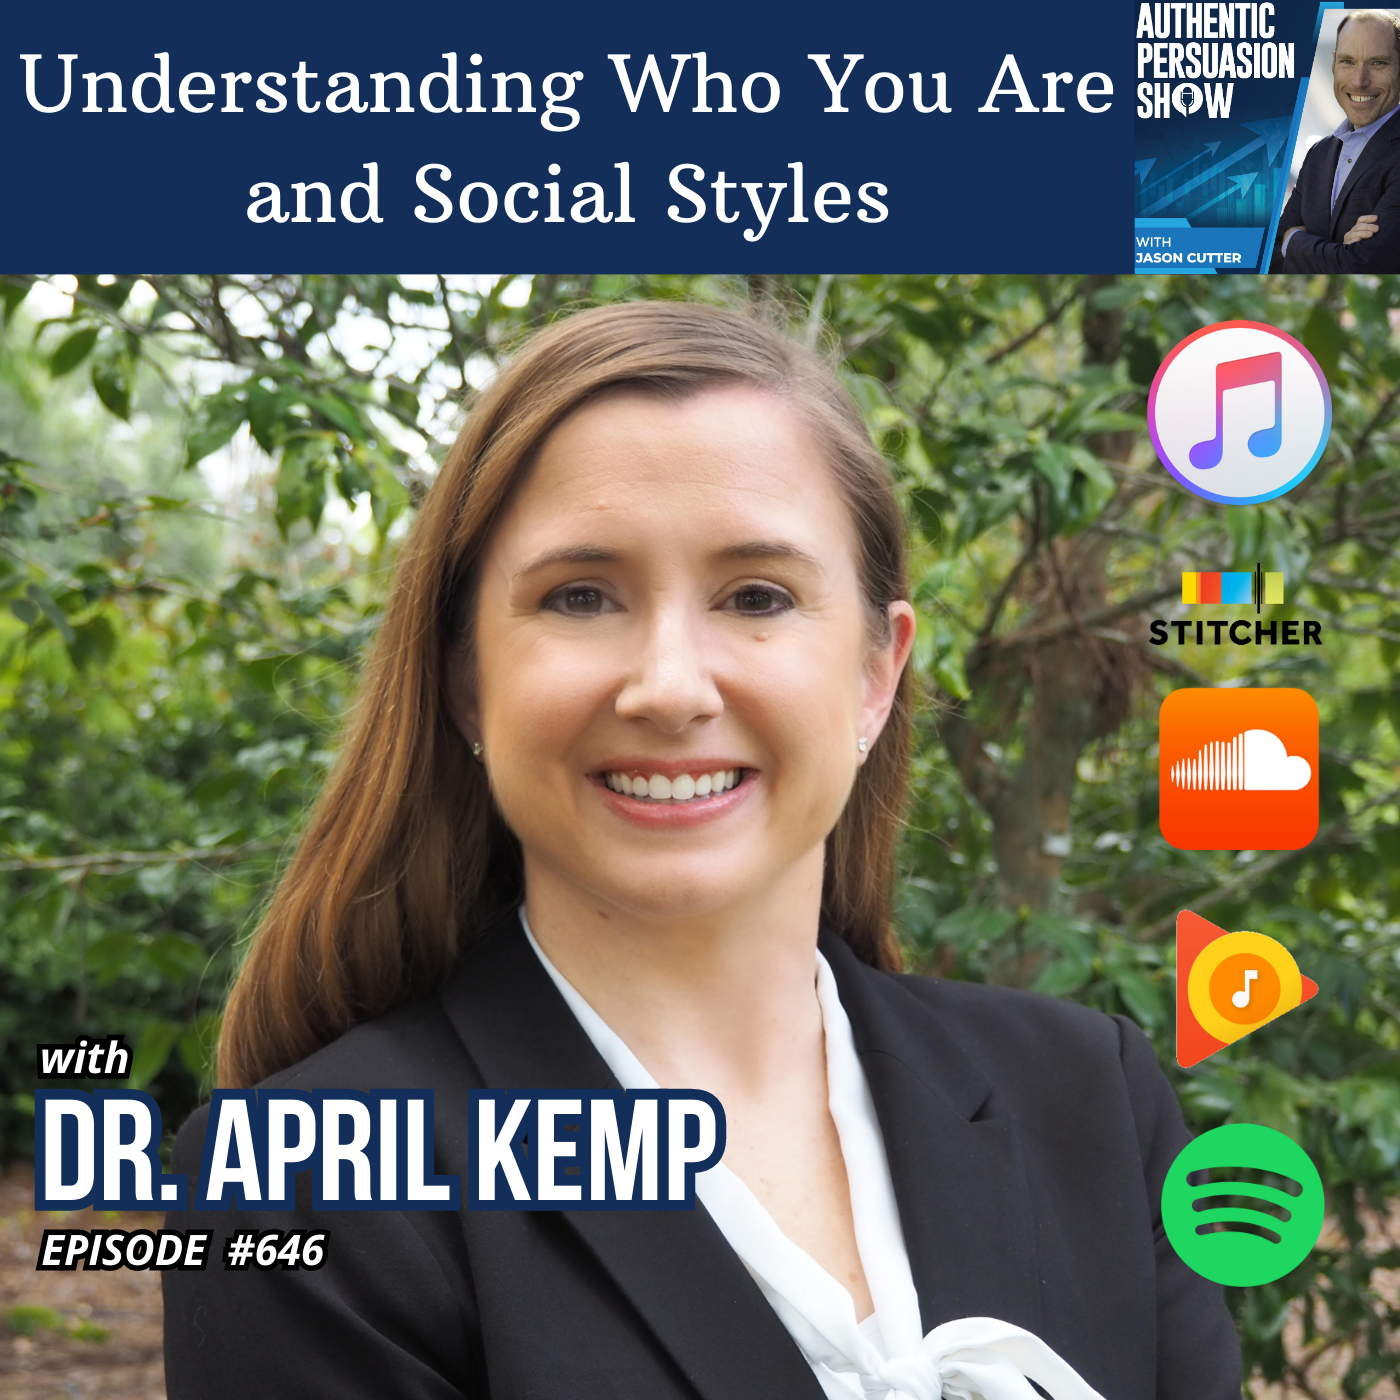 [646] Understanding Who You Are and Social Styles, with Dr. April Kemp from Southeastern Louisiana University